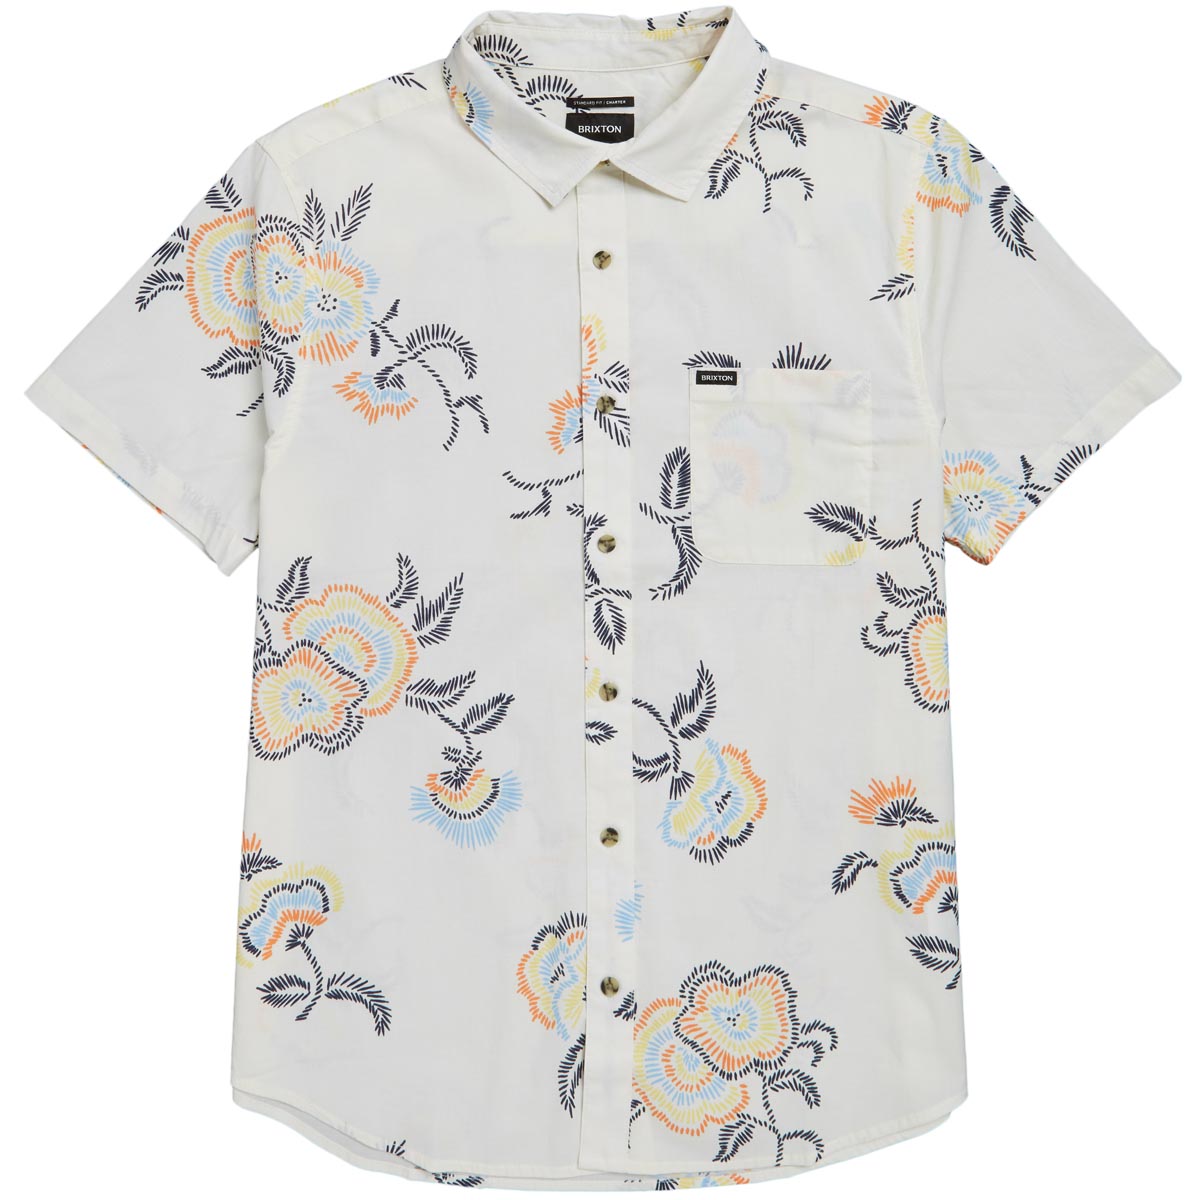 Brixton Charter Shirt - White Field Floral image 1